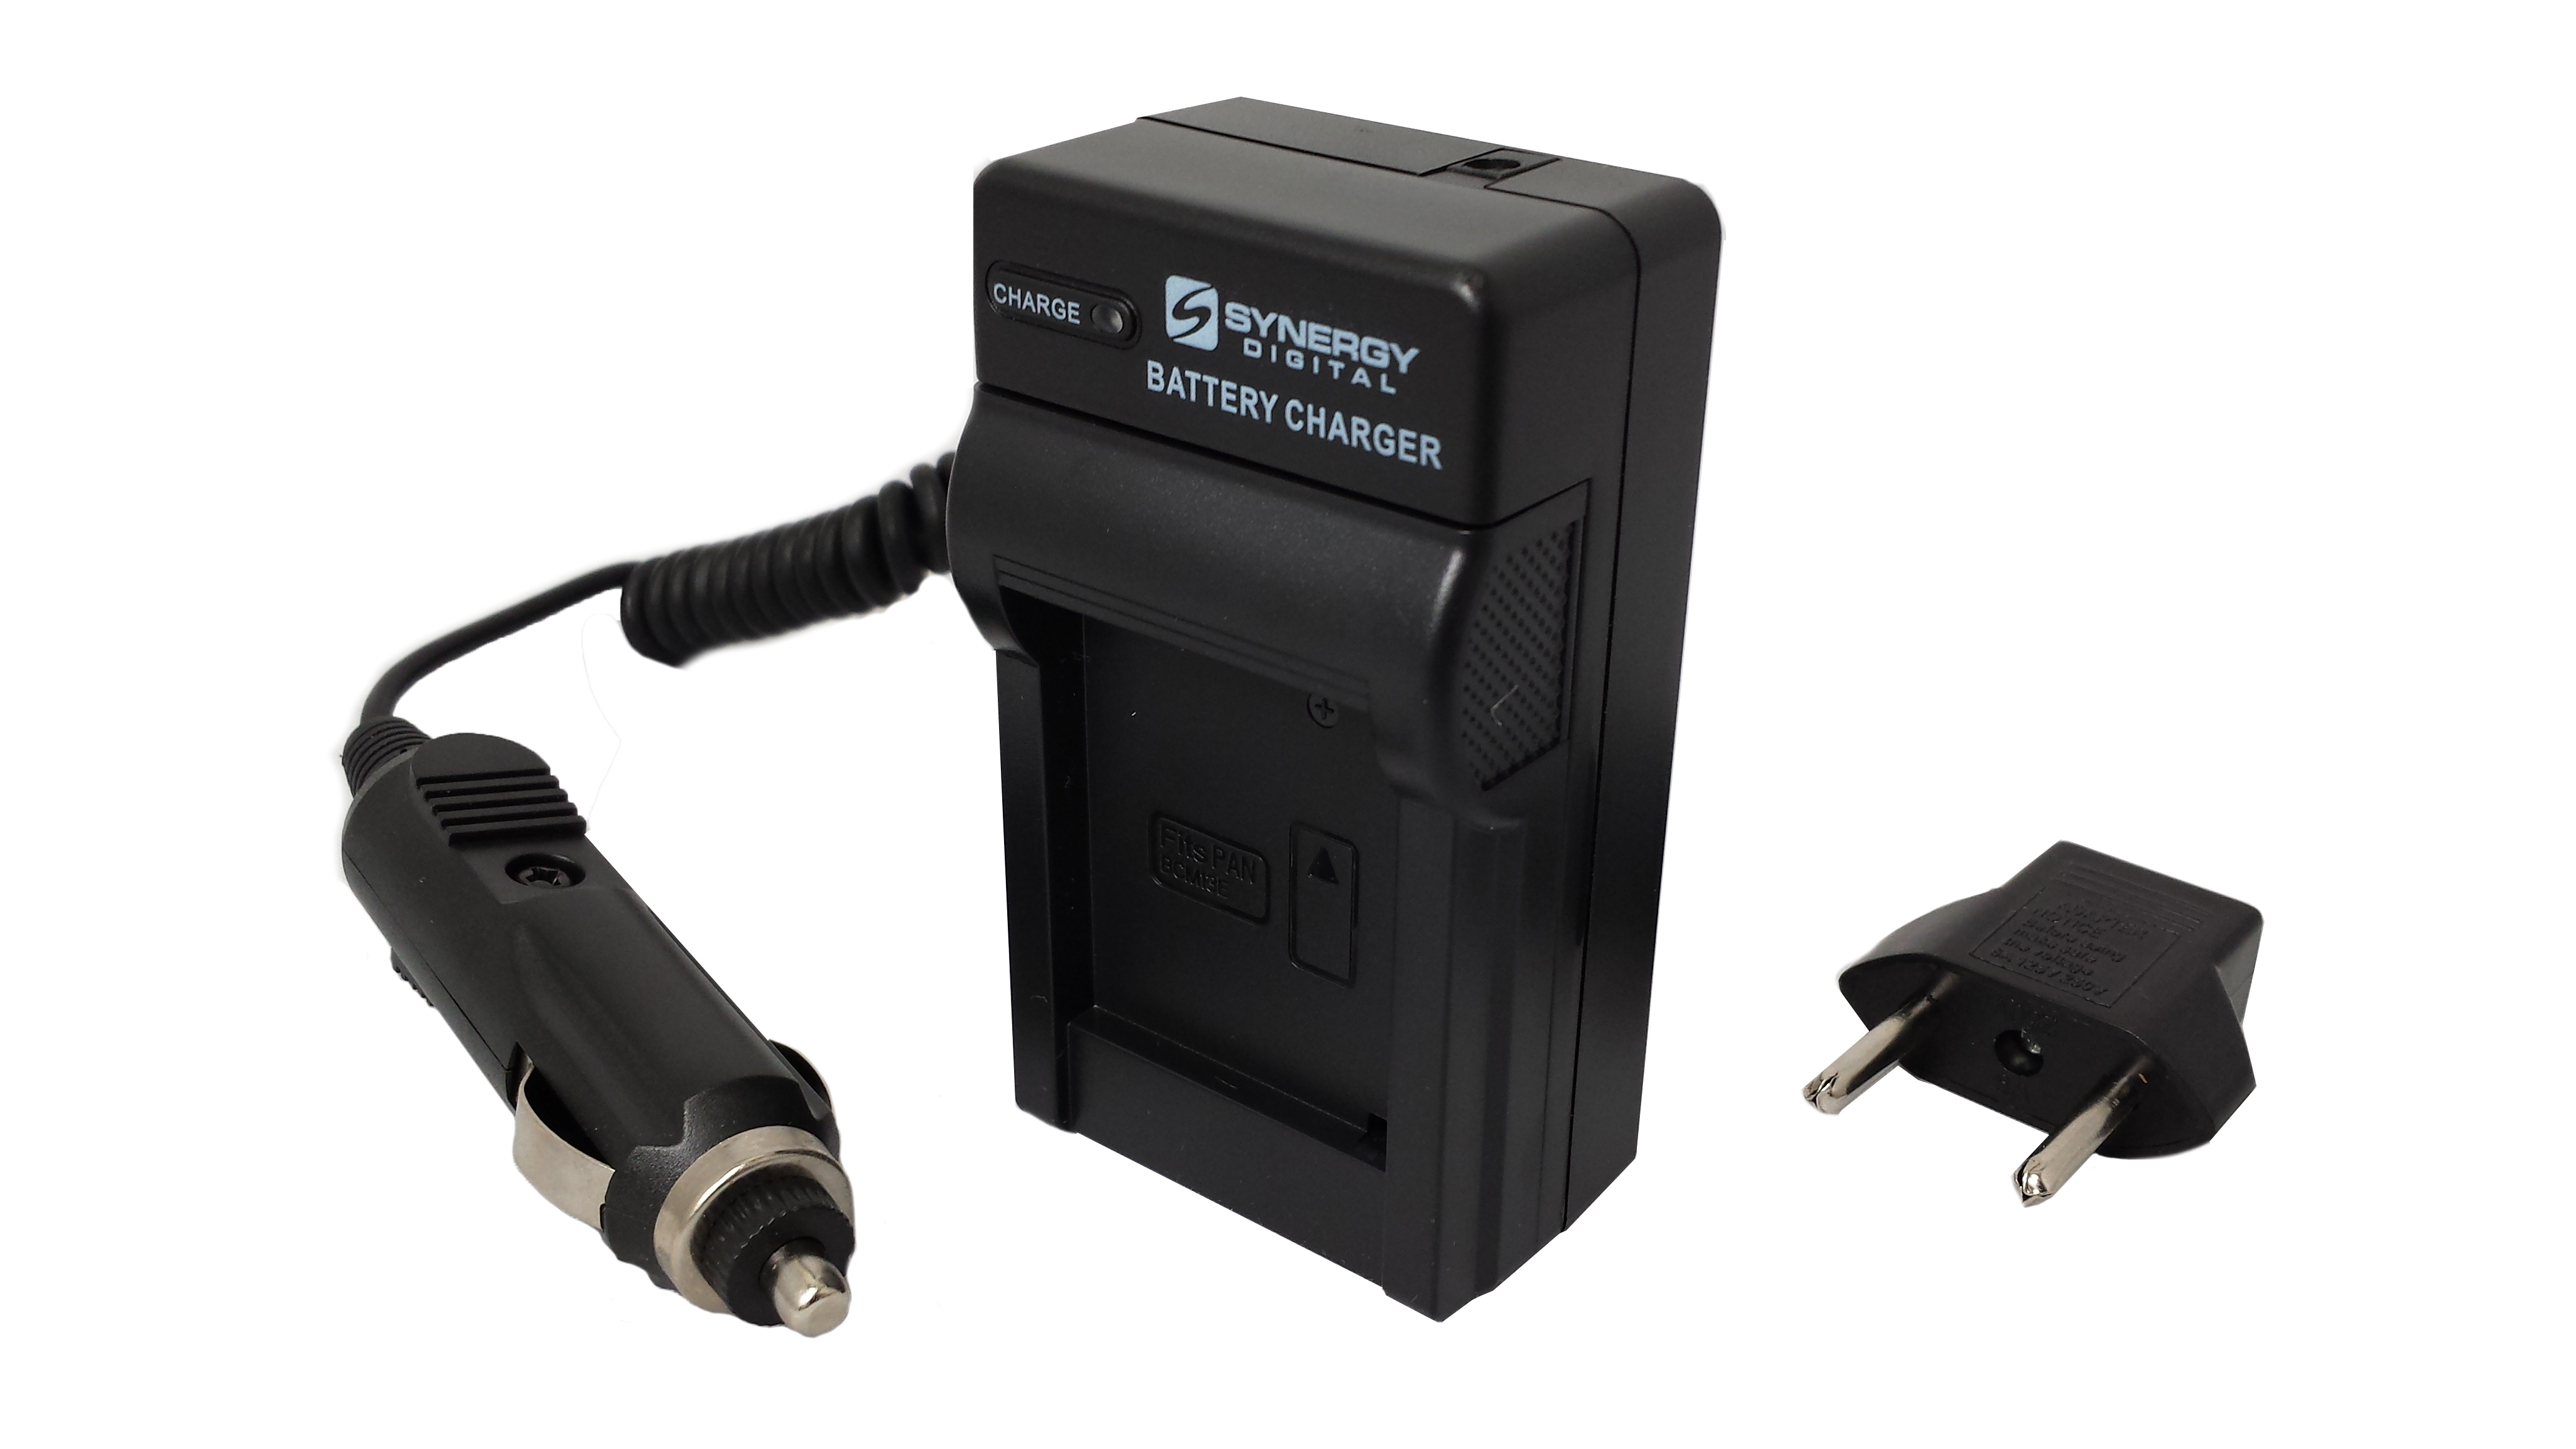 Mini Battery Charger Kit for the Nikon EN-EL23 Battery - With fold-in wall plug, car & EU adapters